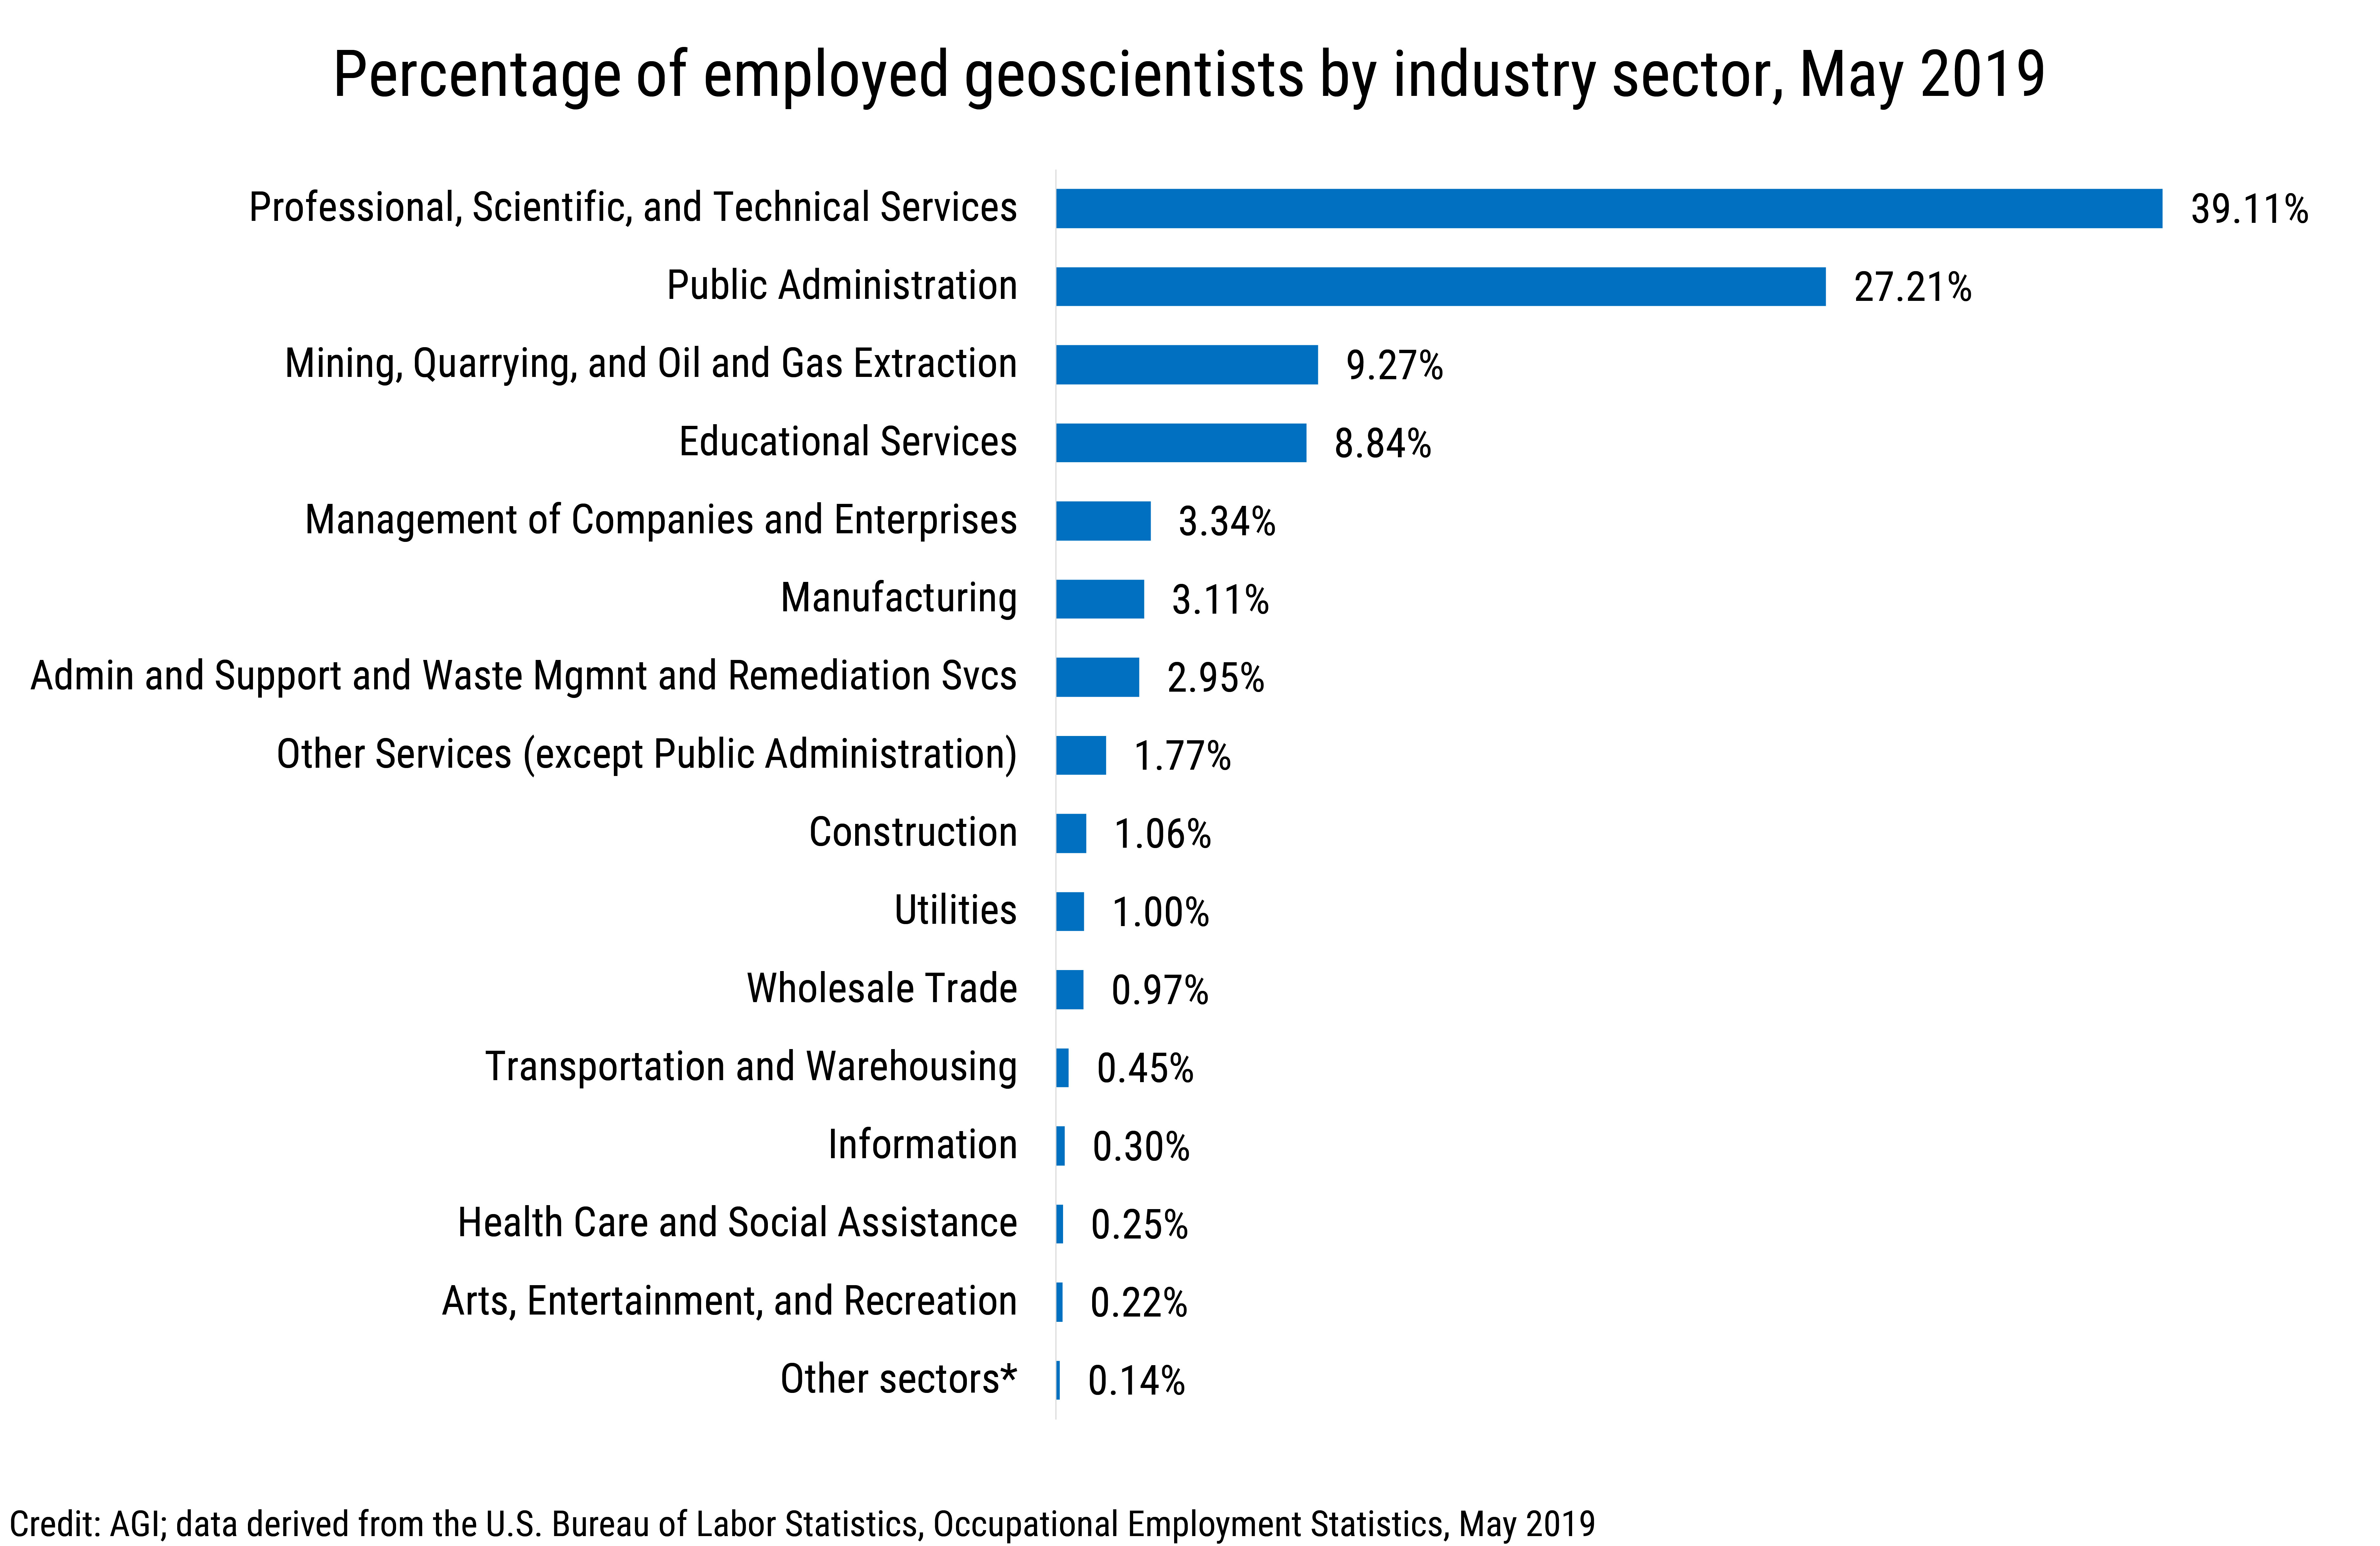 Data Brief 2020-013 chart-01: Percentage of employed geoscientists by industry sector, May 2019 (Credit: AGI, data derived from the U.S. Bureau of Labor Statistics, Occupational Employment Statistics, May 2019)